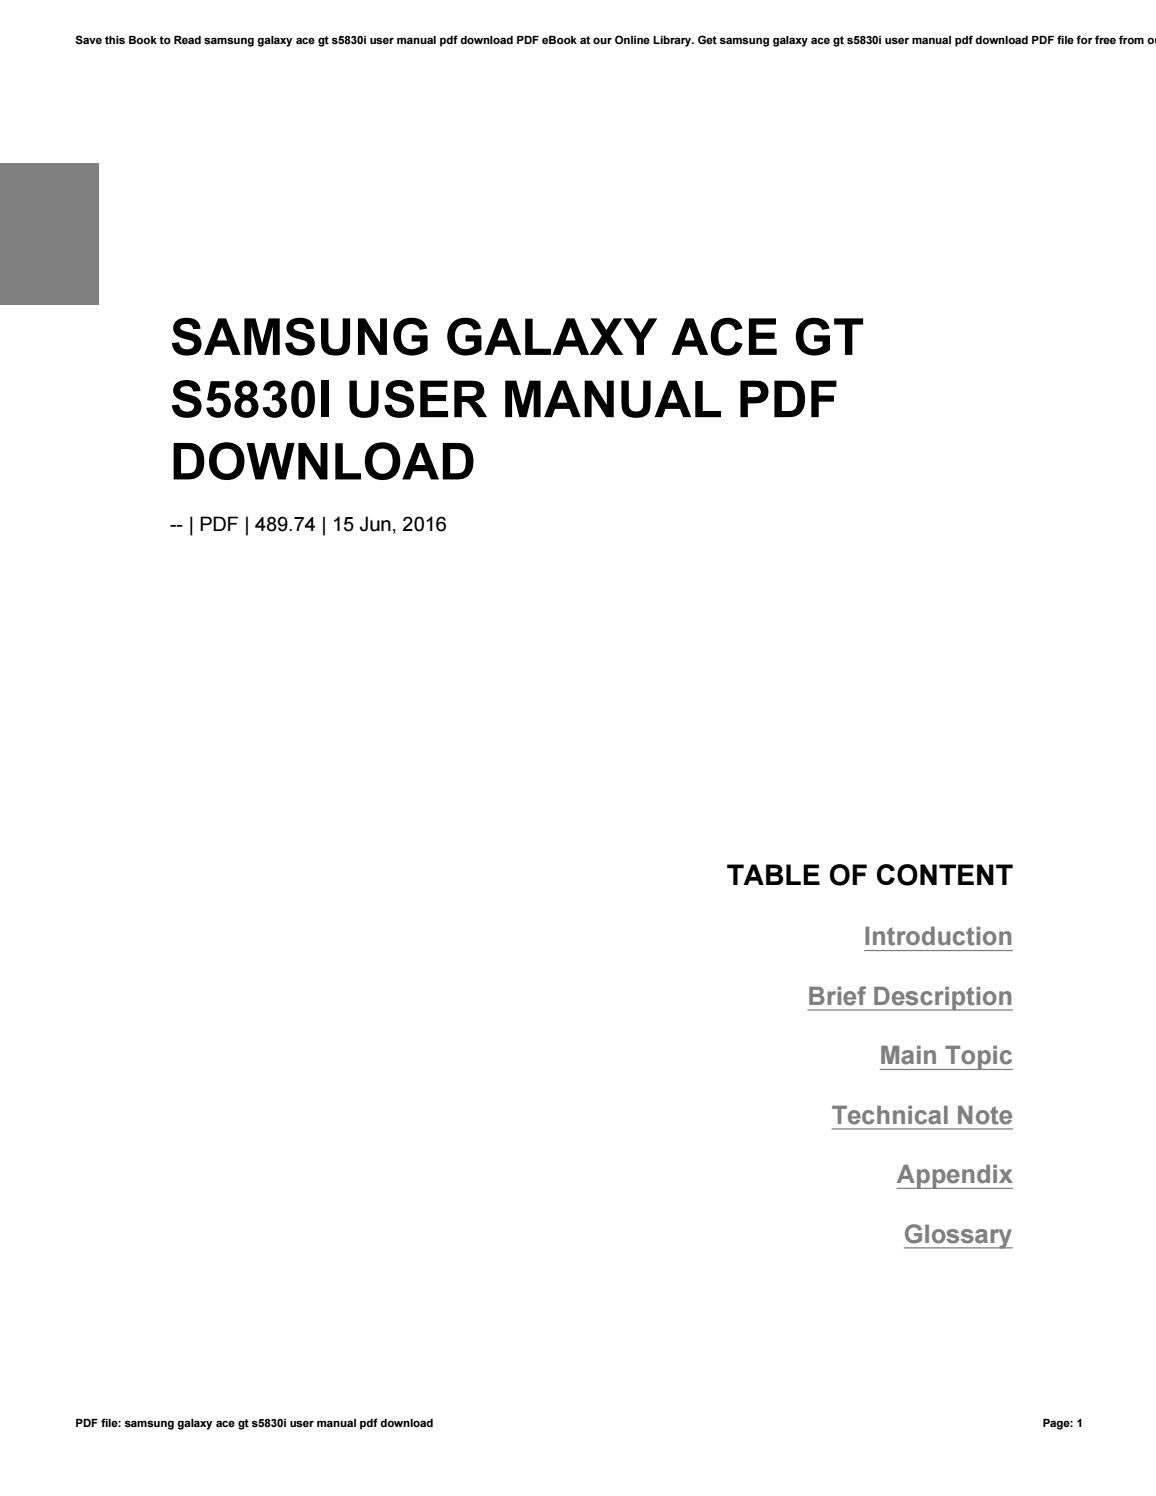 samsung galaxy rugby manual download